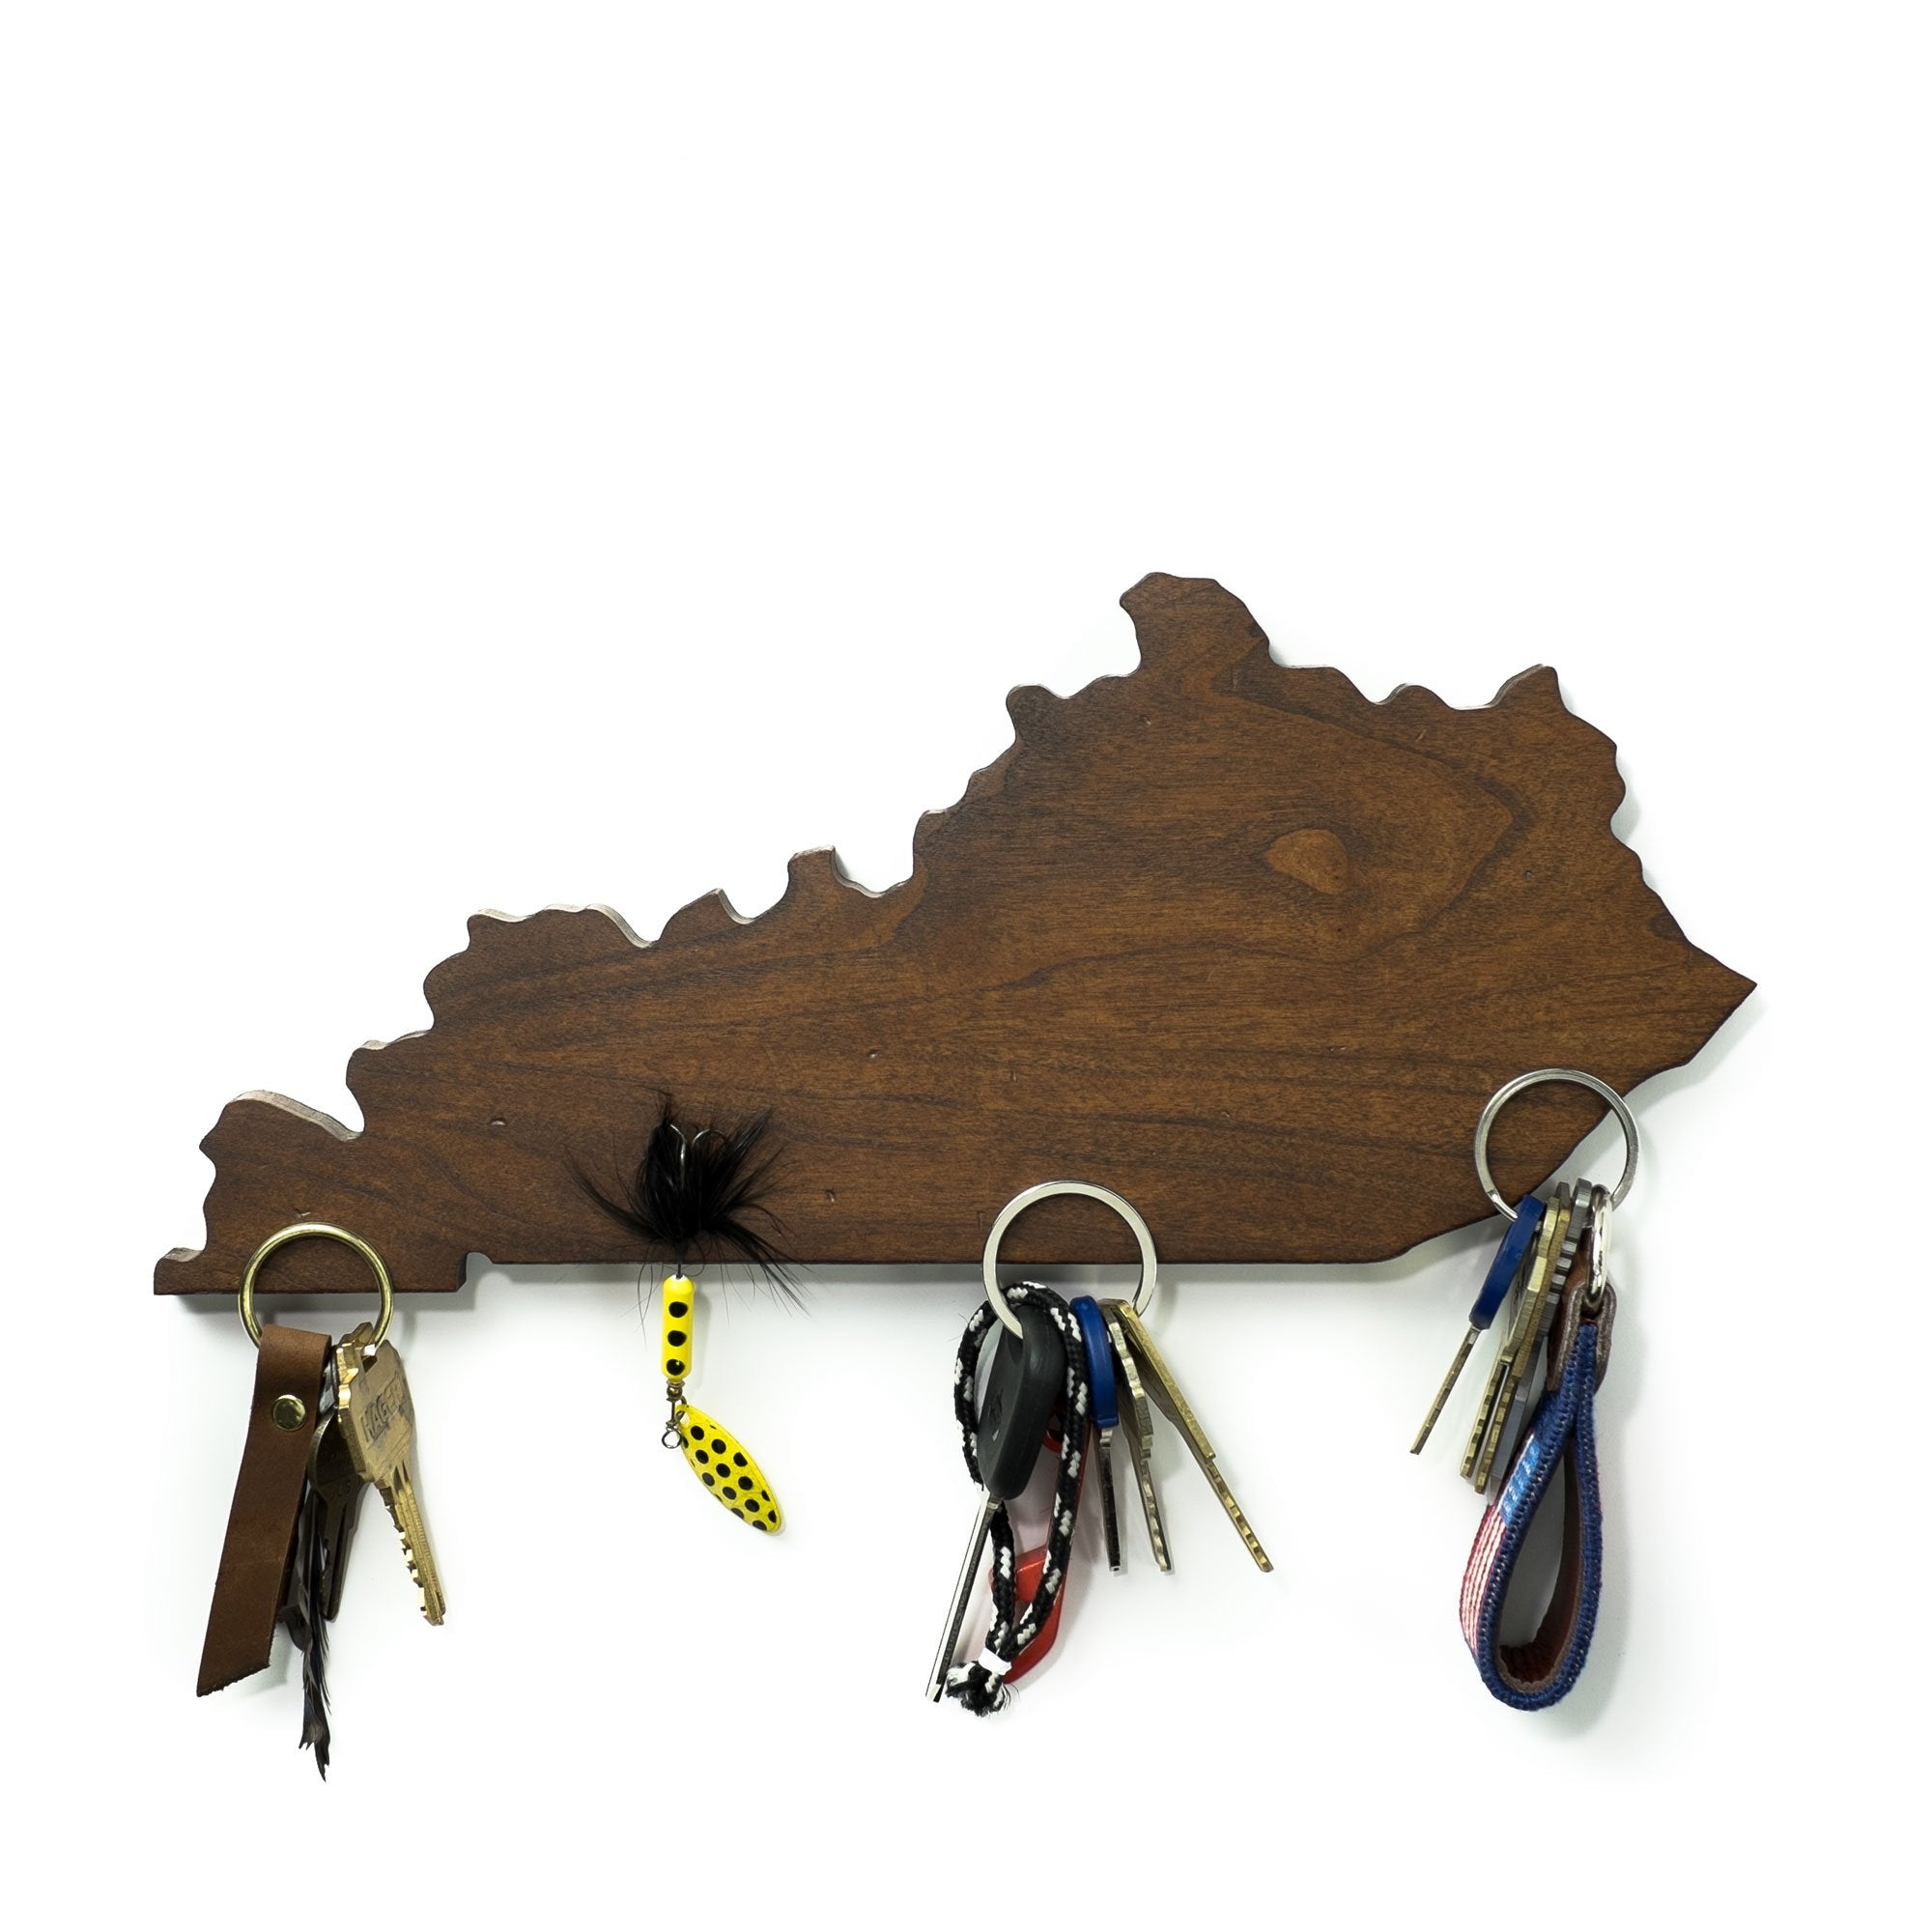 Kentucky Keychain - High Quality Thick Metal State Love Key Ring